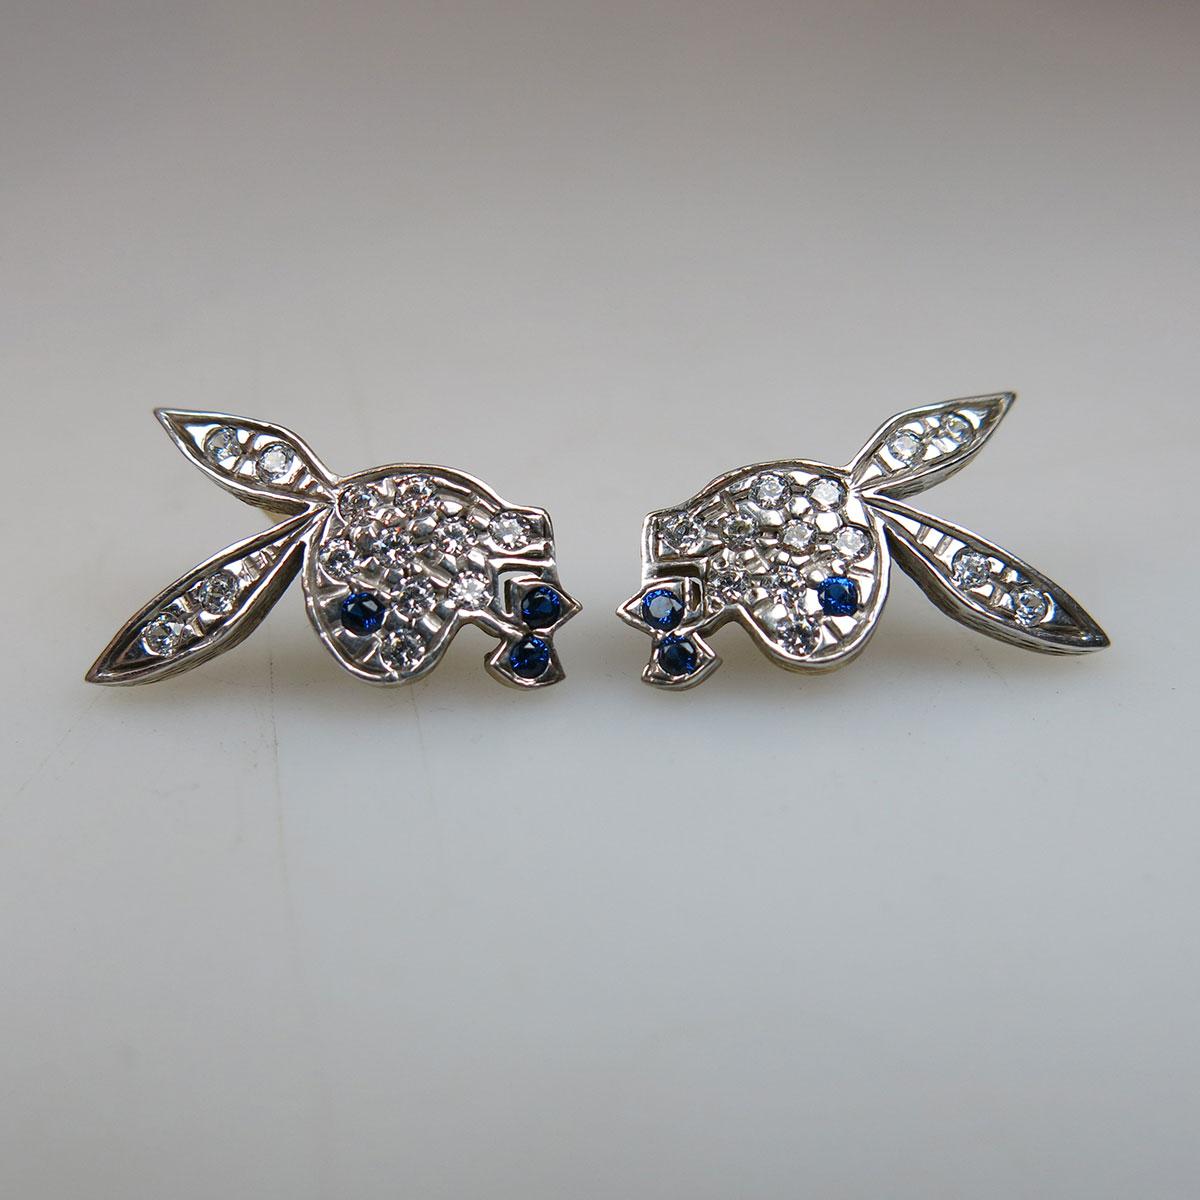 Pair Of 9k Yellow And White Gold “Bunny” Earrings